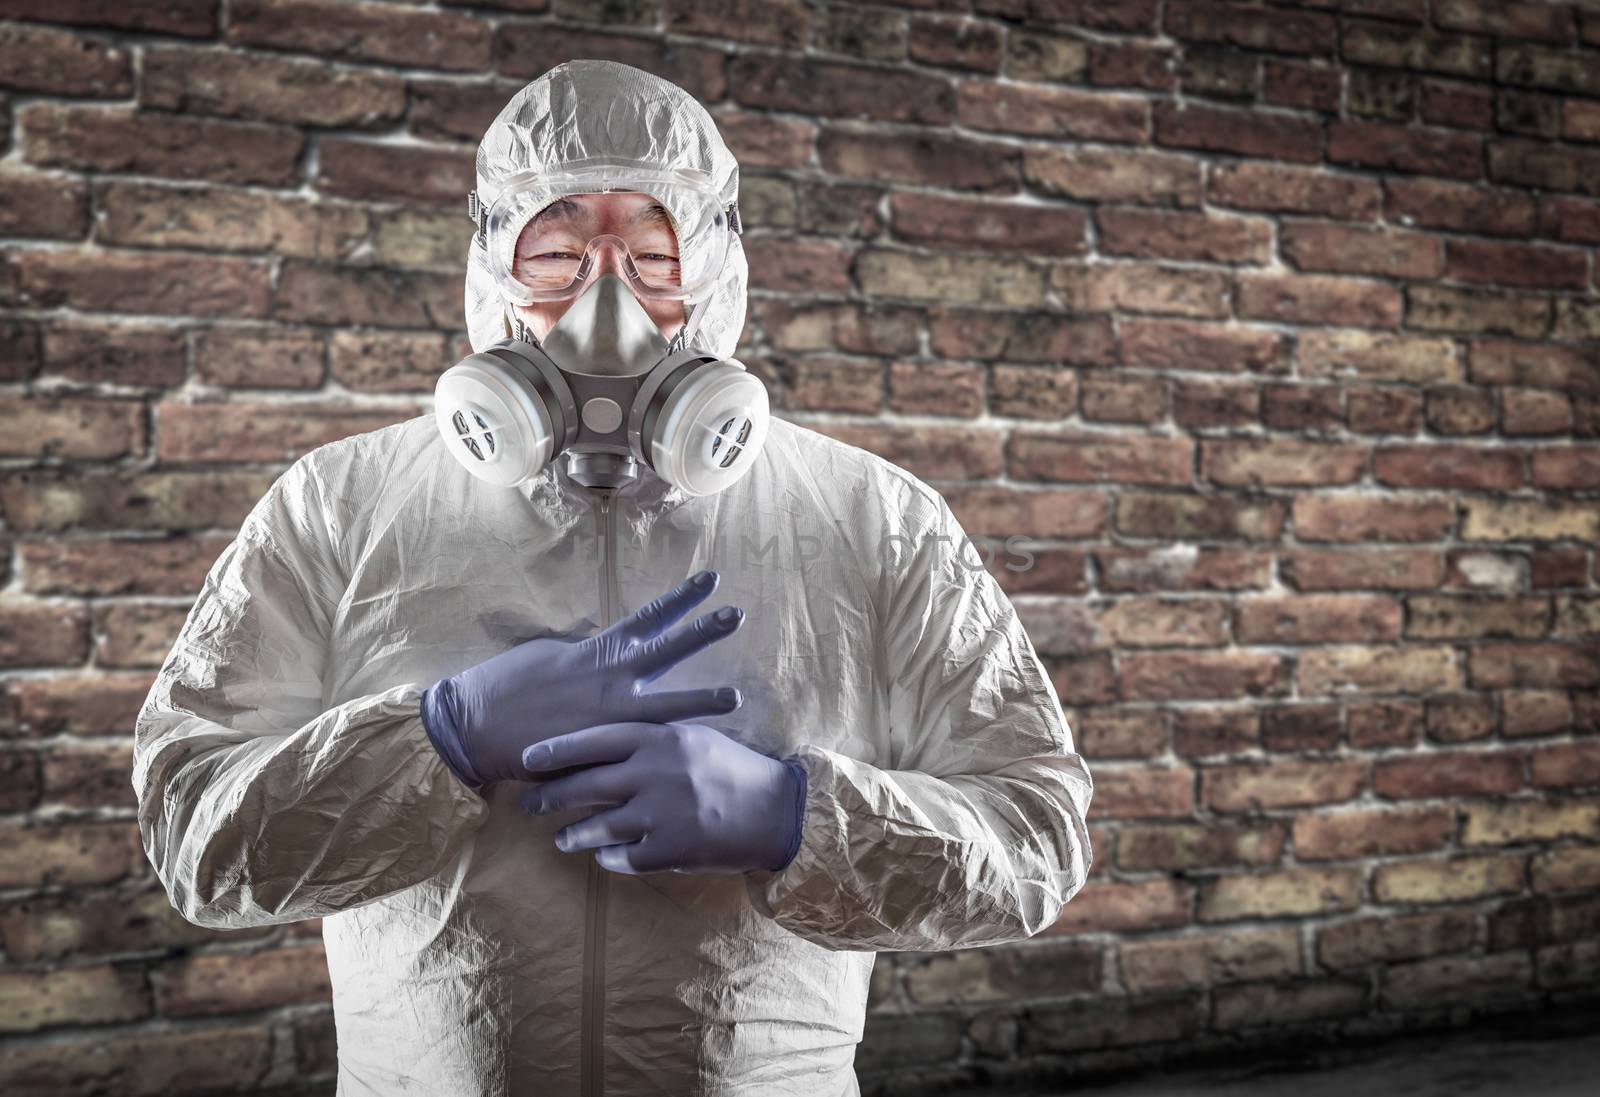 Chinese Man Wearing Hazmat Suit, Goggles and Gas Mask with Brick Wall Background. by Feverpitched